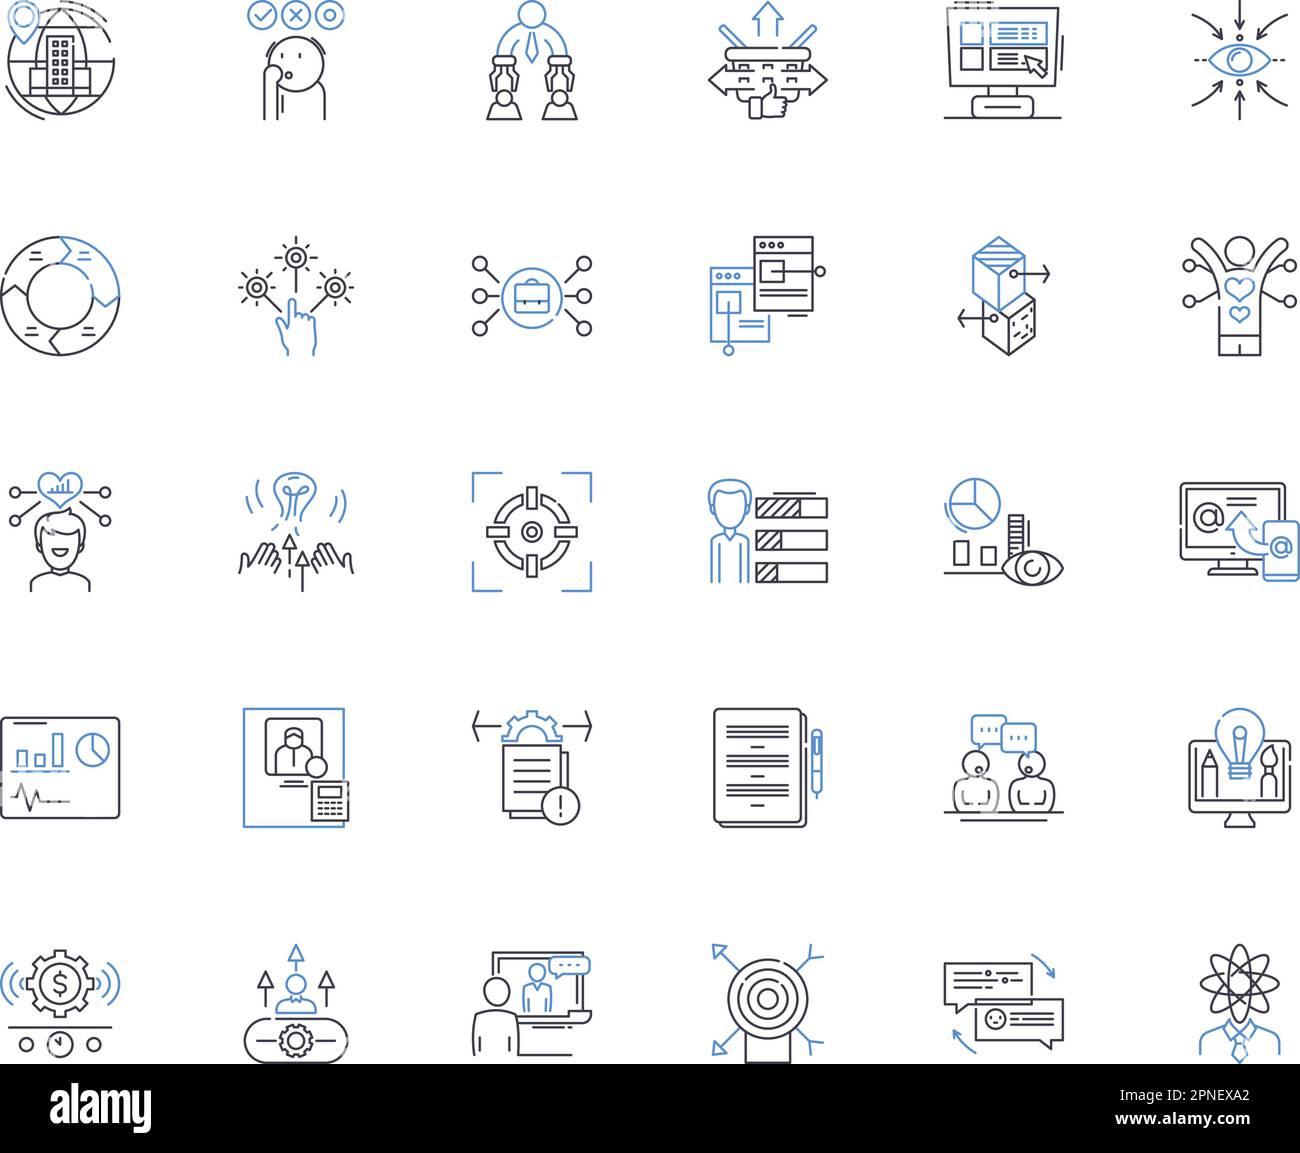 Collaborator nerks line icons collection. Teamwork, Partnership, Alliance, Cooperation, Synergy, Coordination, Cohesion vector and linear illustration Stock Vector